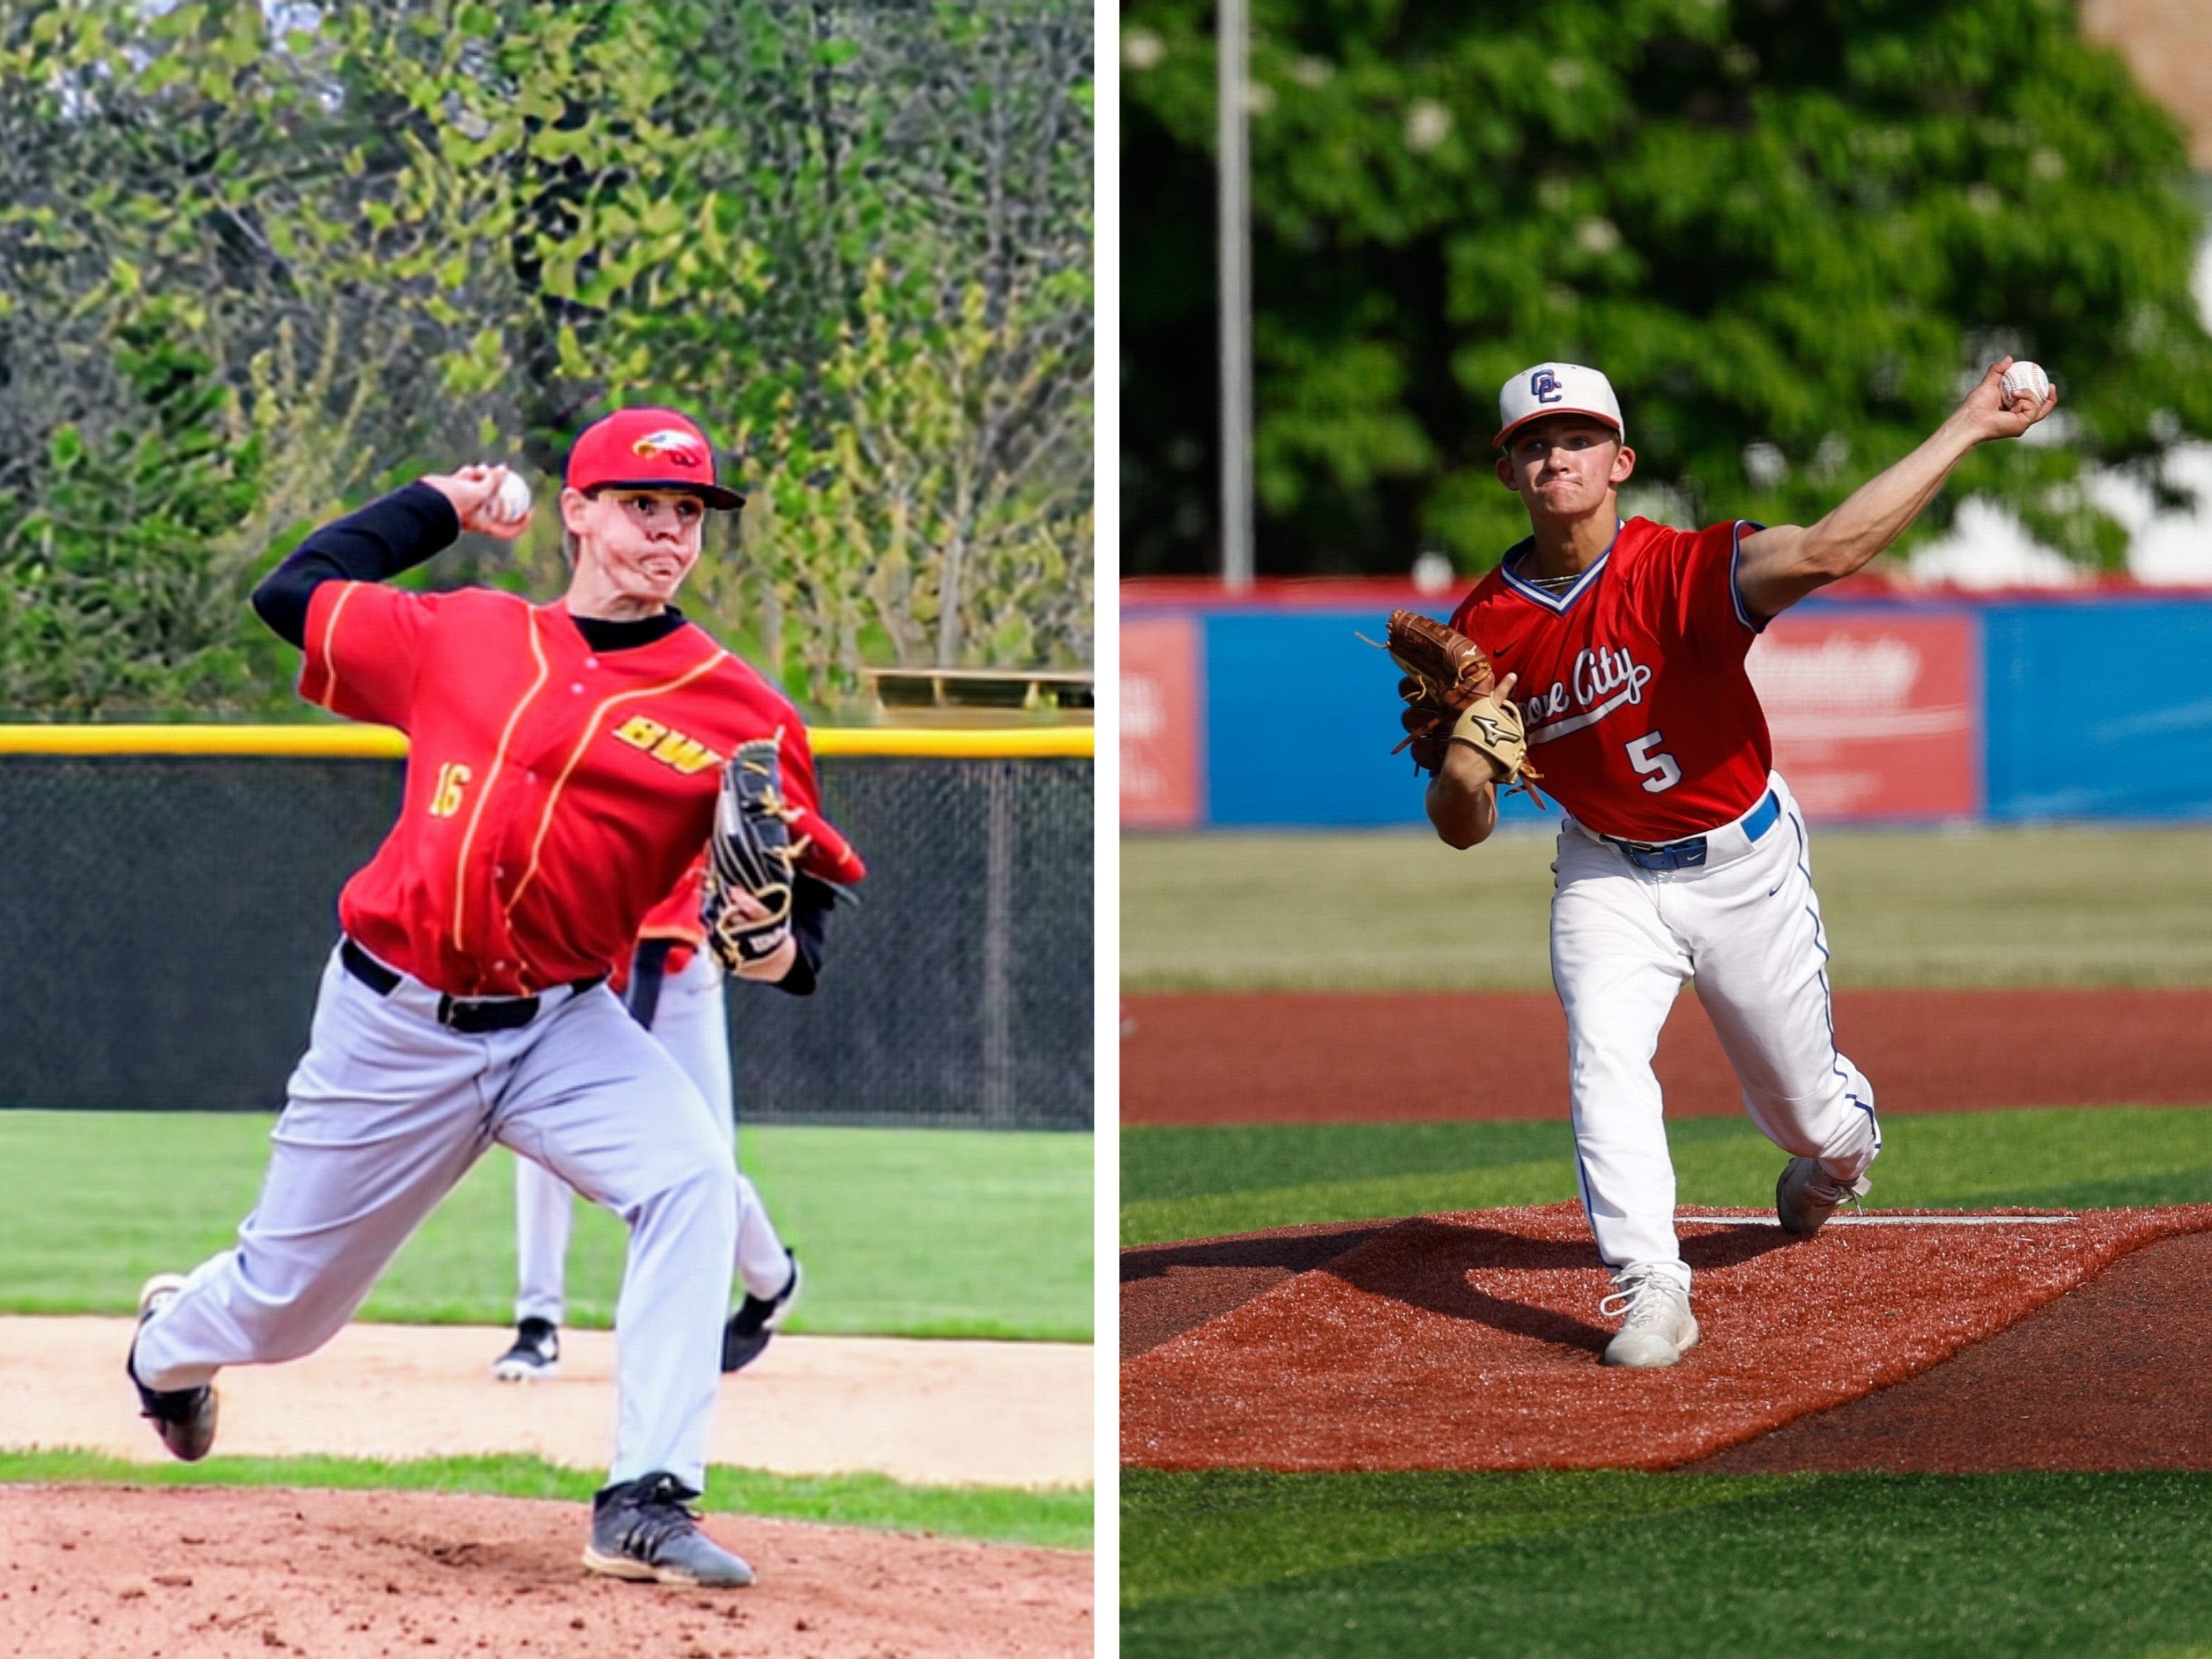 Vote for the Greater Columbus high school baseball regular season player of the year